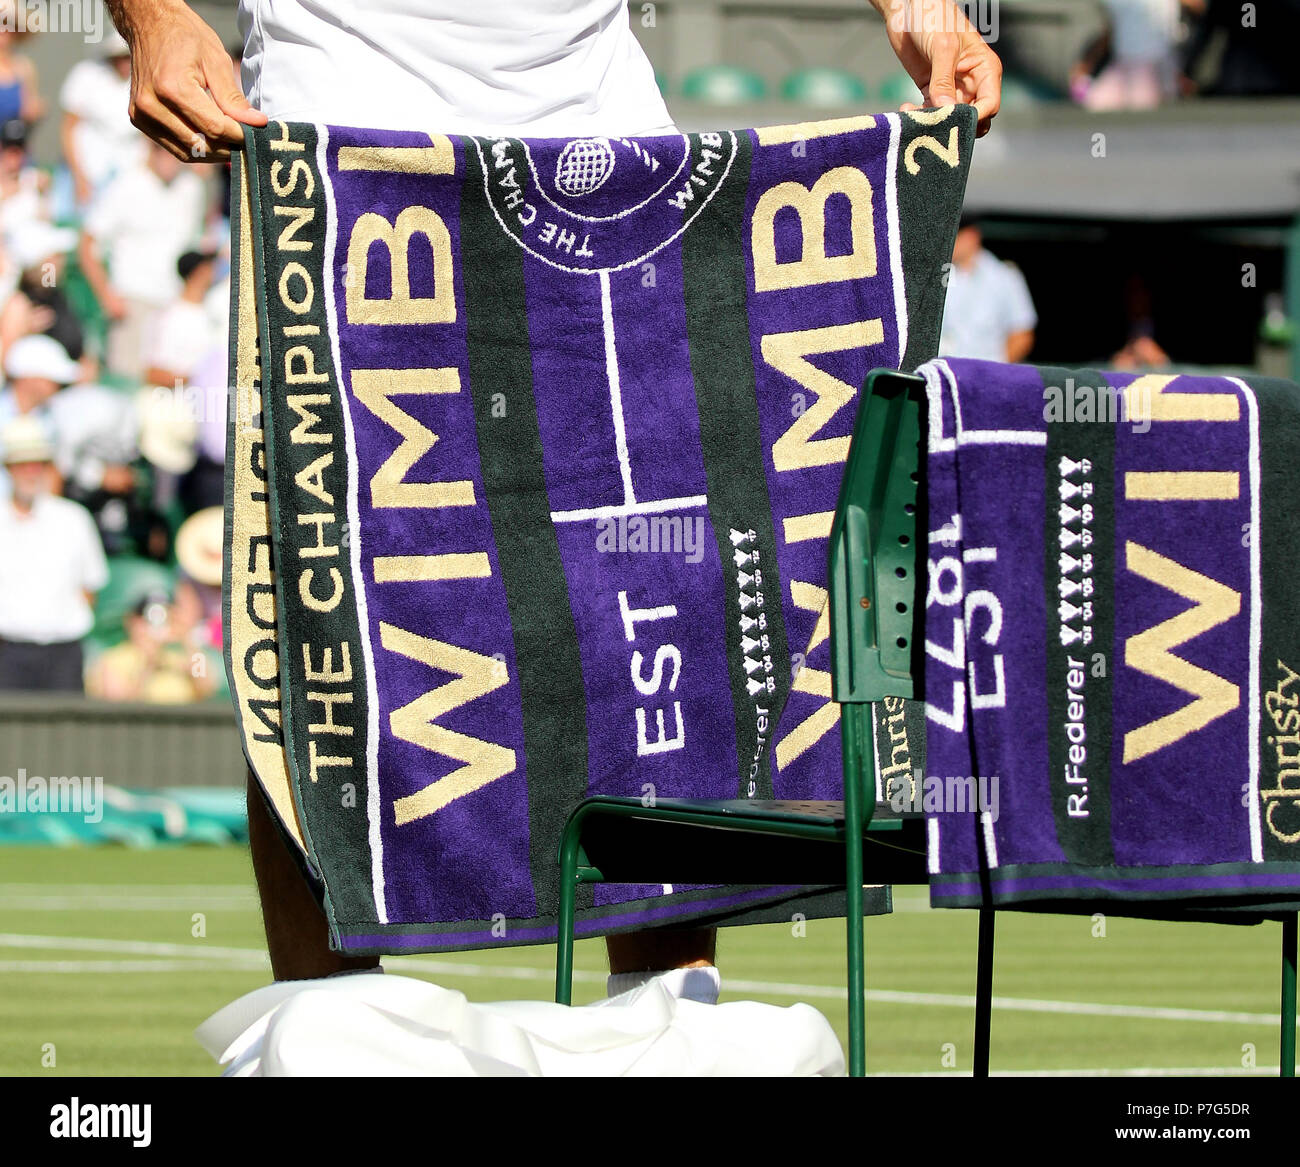 ROGER FEDERER, LIMITED EDITION HANDTUCH, die Wimbledon Championships 2018, die Wimbledon Championships 2018 DIE ALL ENGLAND TENNIS CLUB, 2018 Stockfoto